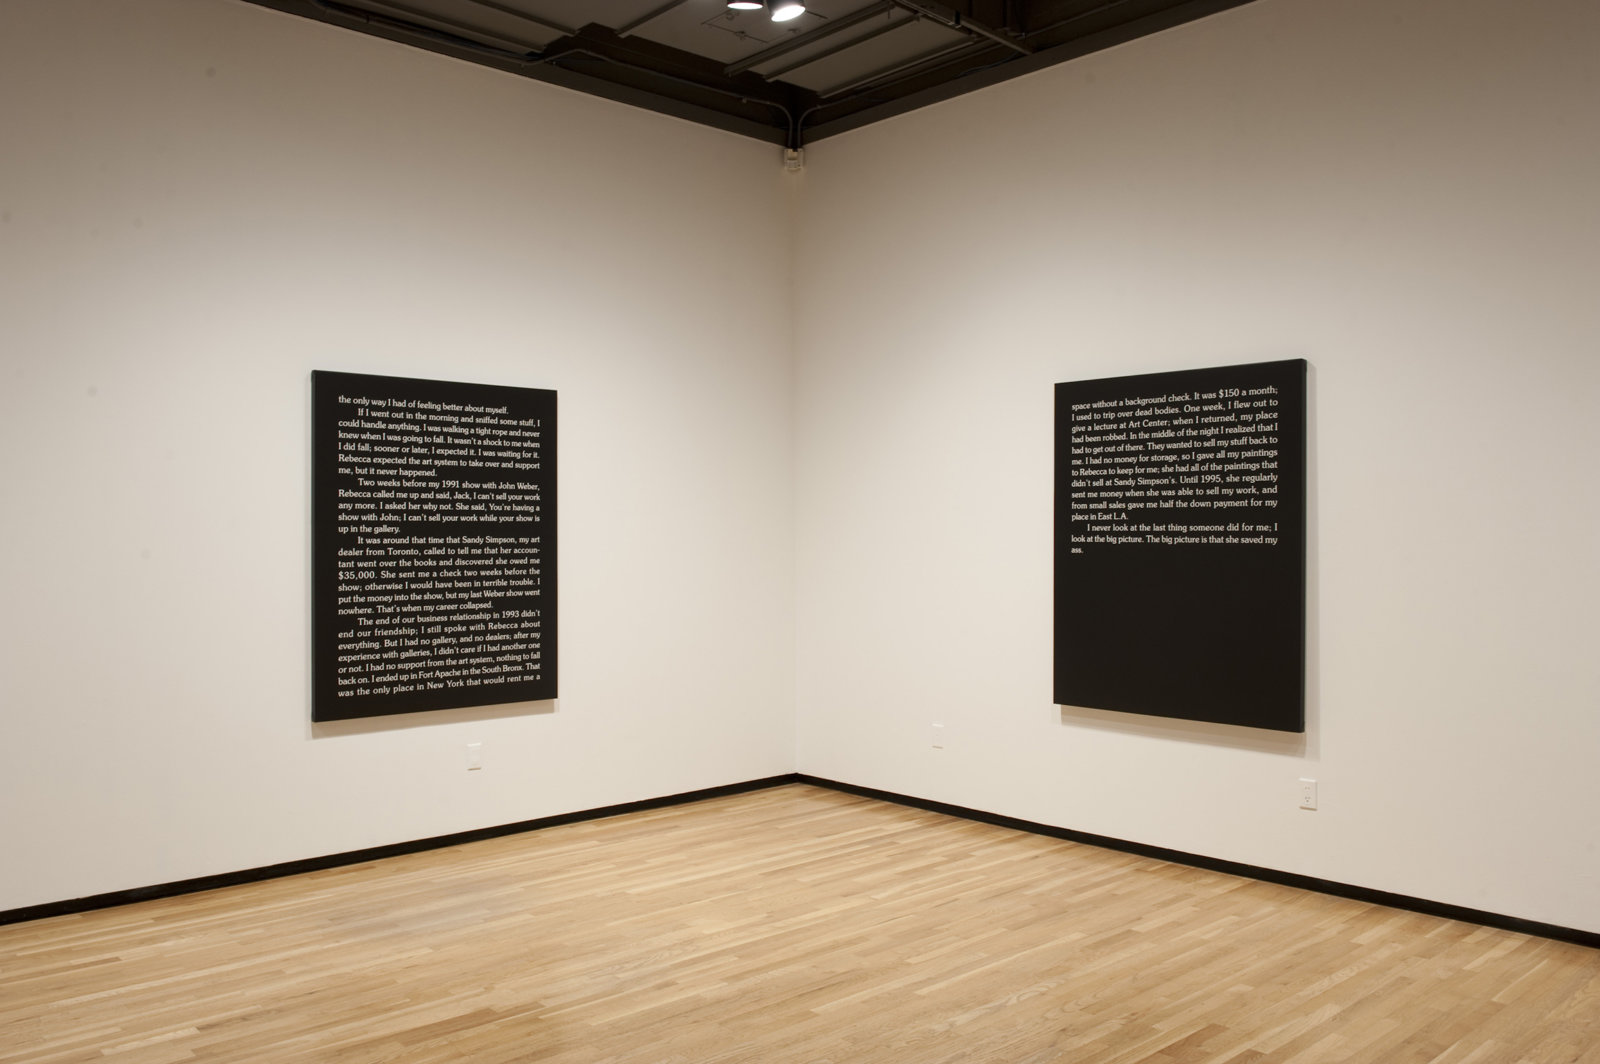 Ron Terada, Jack, 2010, acrylic on canvas, each 60 x 48 in. (152 x 122 cm). Installation view, Who I Think I Am, Walter Phillips Gallery, Banff, AB, 2010